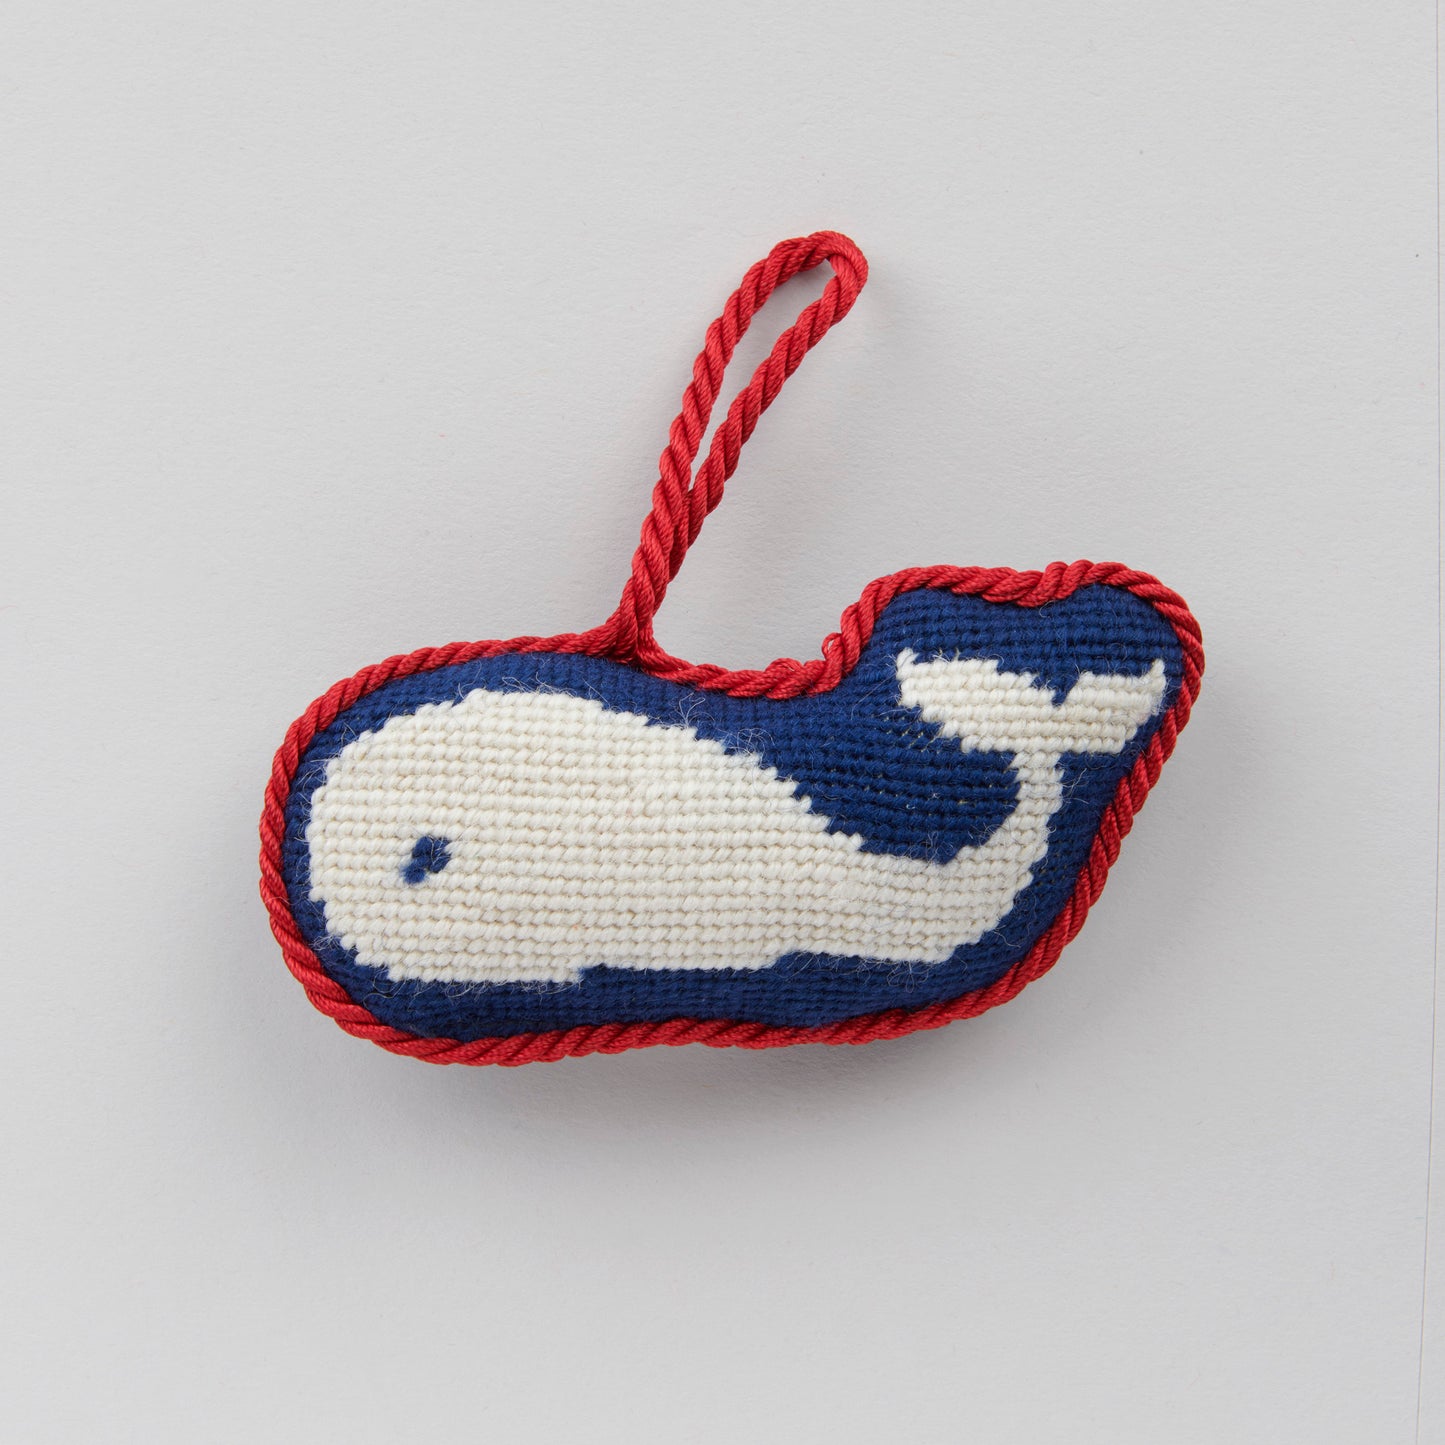 Ornament - Needlepoint Whale